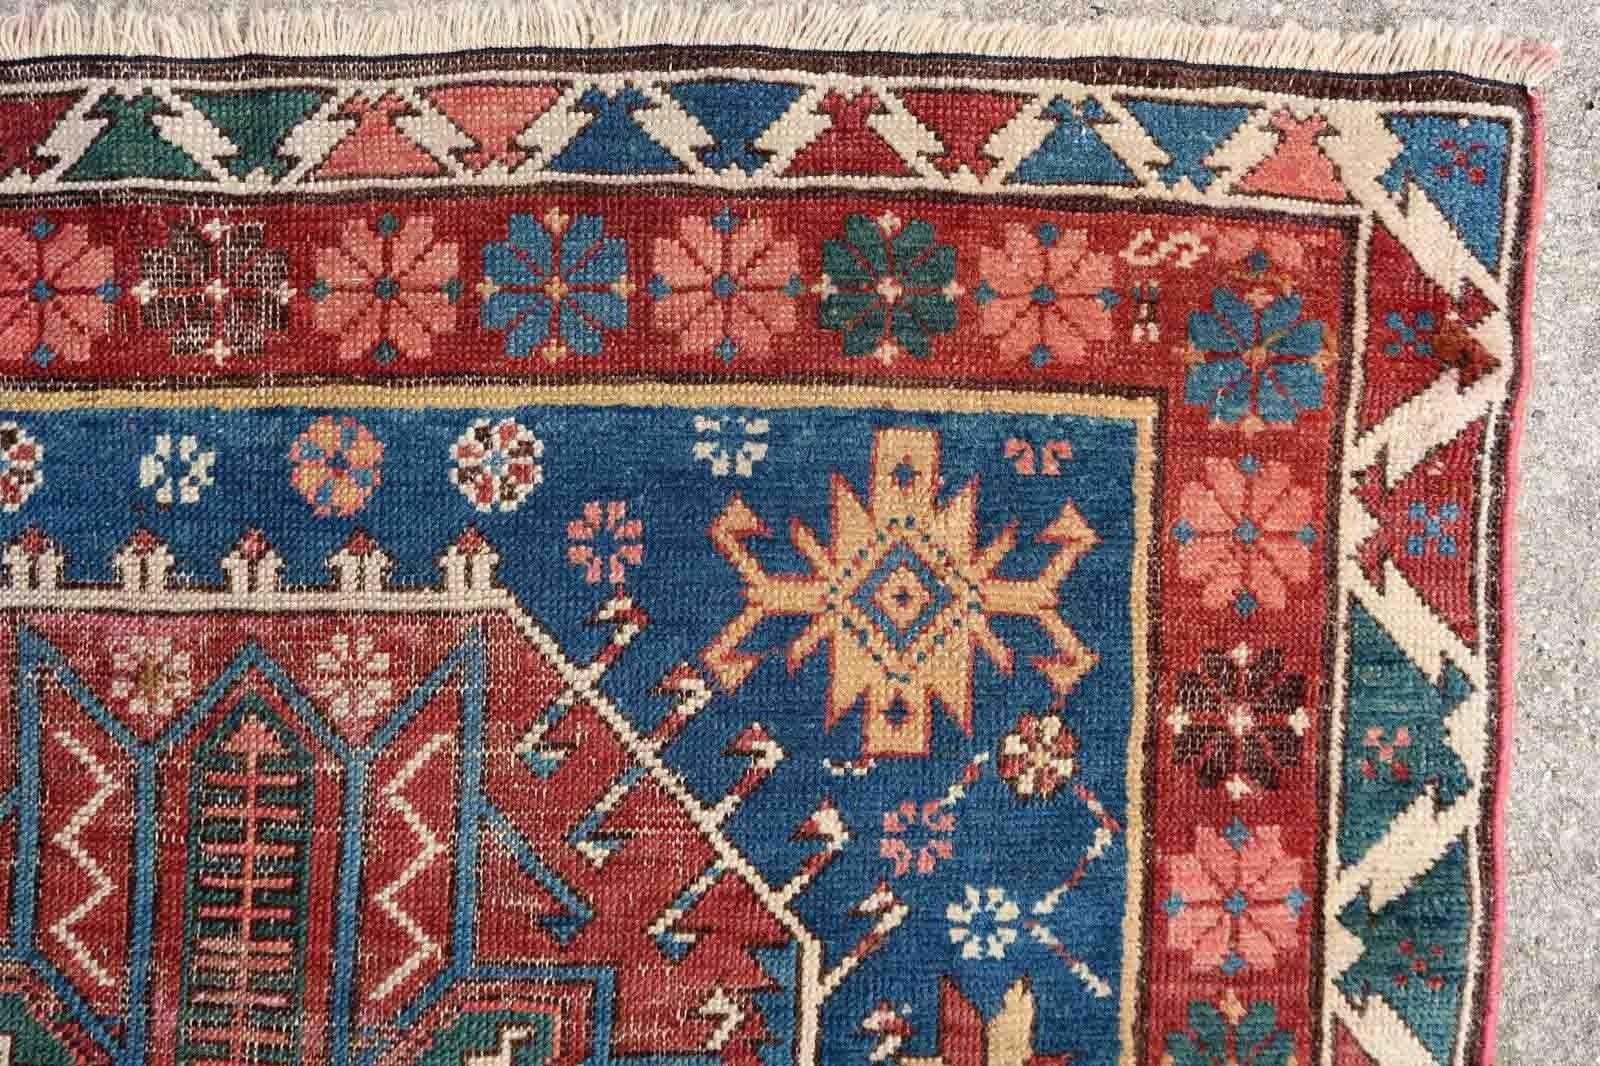 Handmade antique rug from Caucasian Shirvan region in blue and red colors. The rug has two different blues on the background. The rug is from the end of 19th century in distressed condition, it has some low pile and old restorations.

-condition: